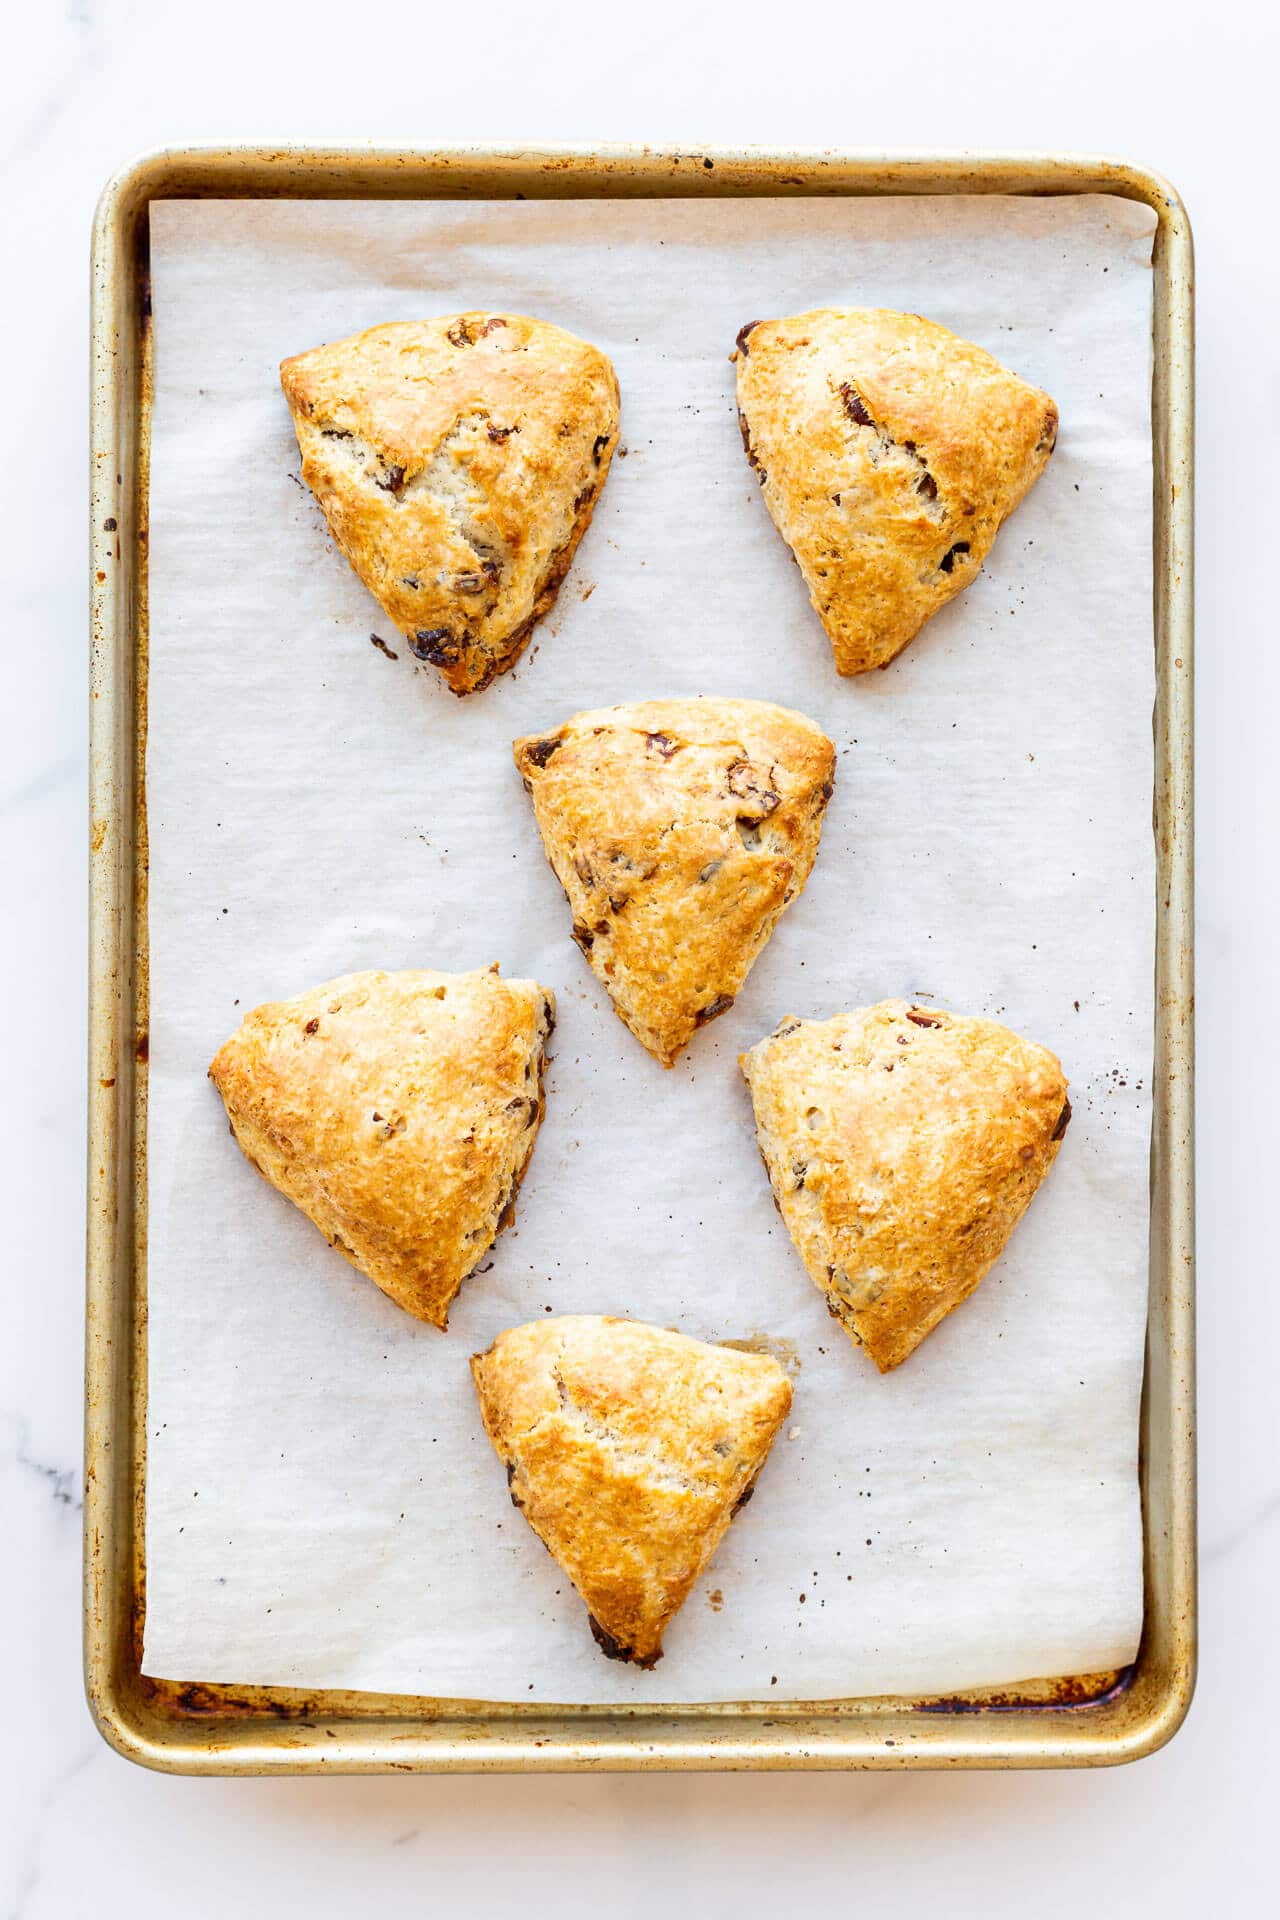 Parchment-lined sheet pan with 6 triangle wedge fruit scones, unglazed